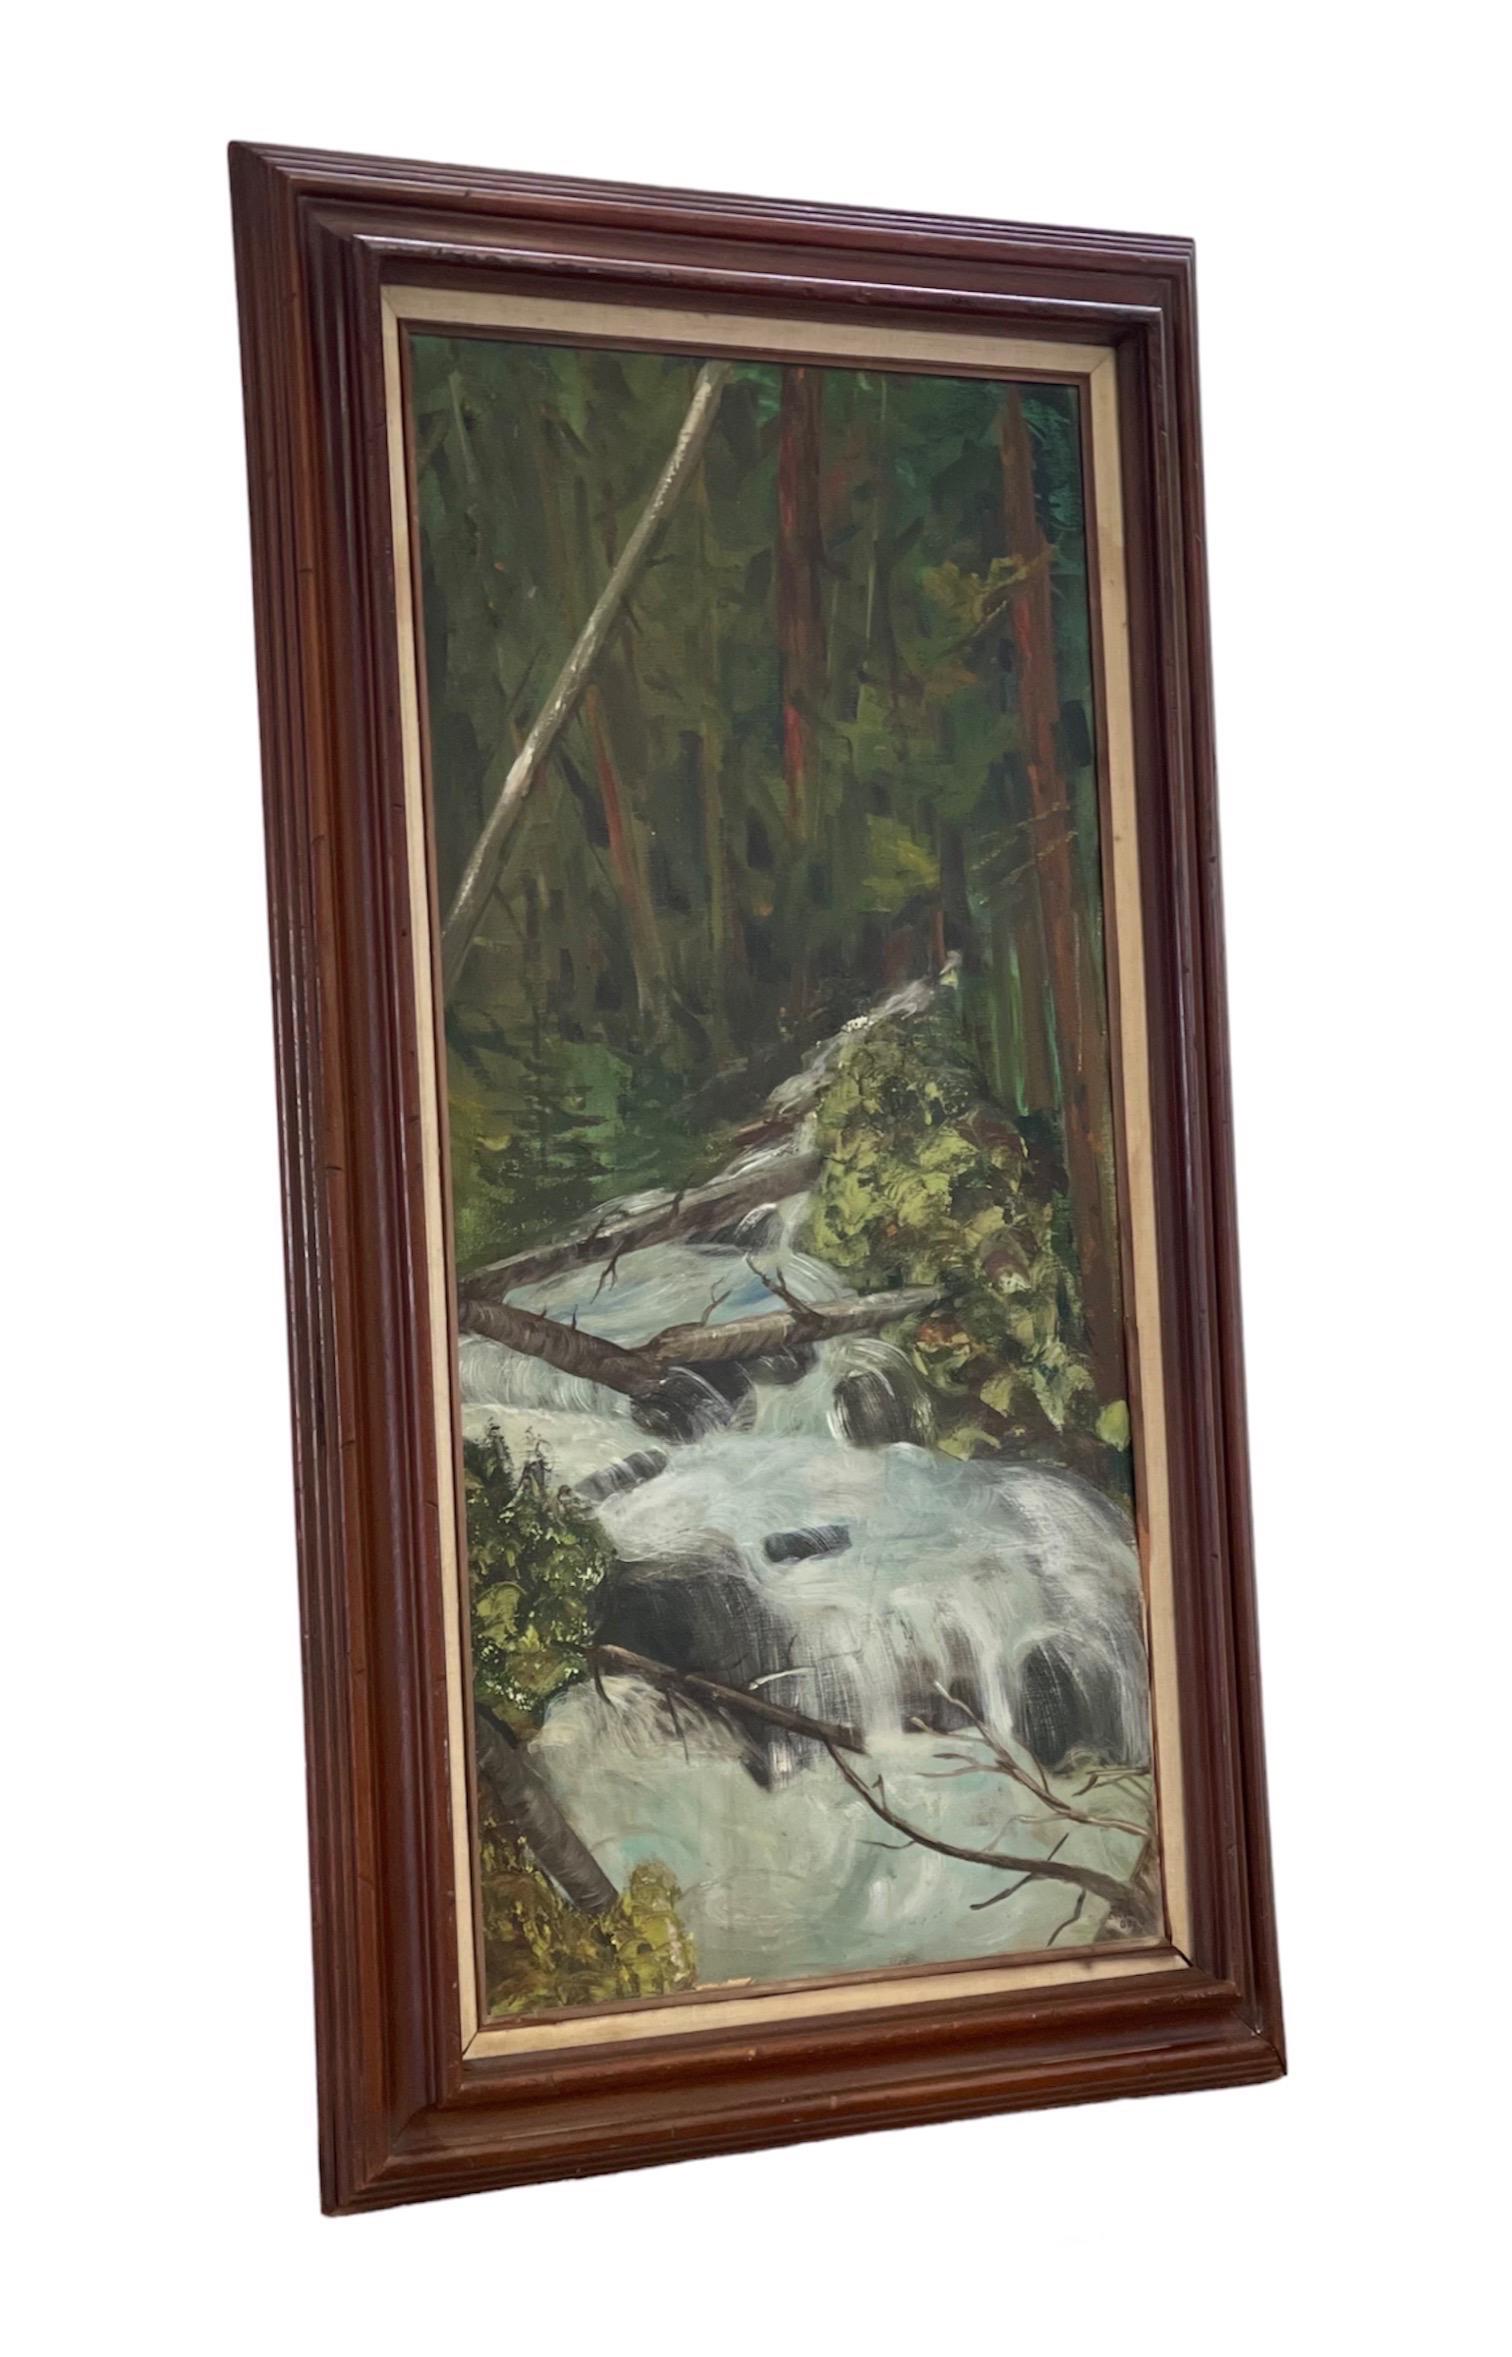 1970 Landscape waterfall oil painting on canvas by Corch Obell.

Dimensions. 25 W; 43 H.